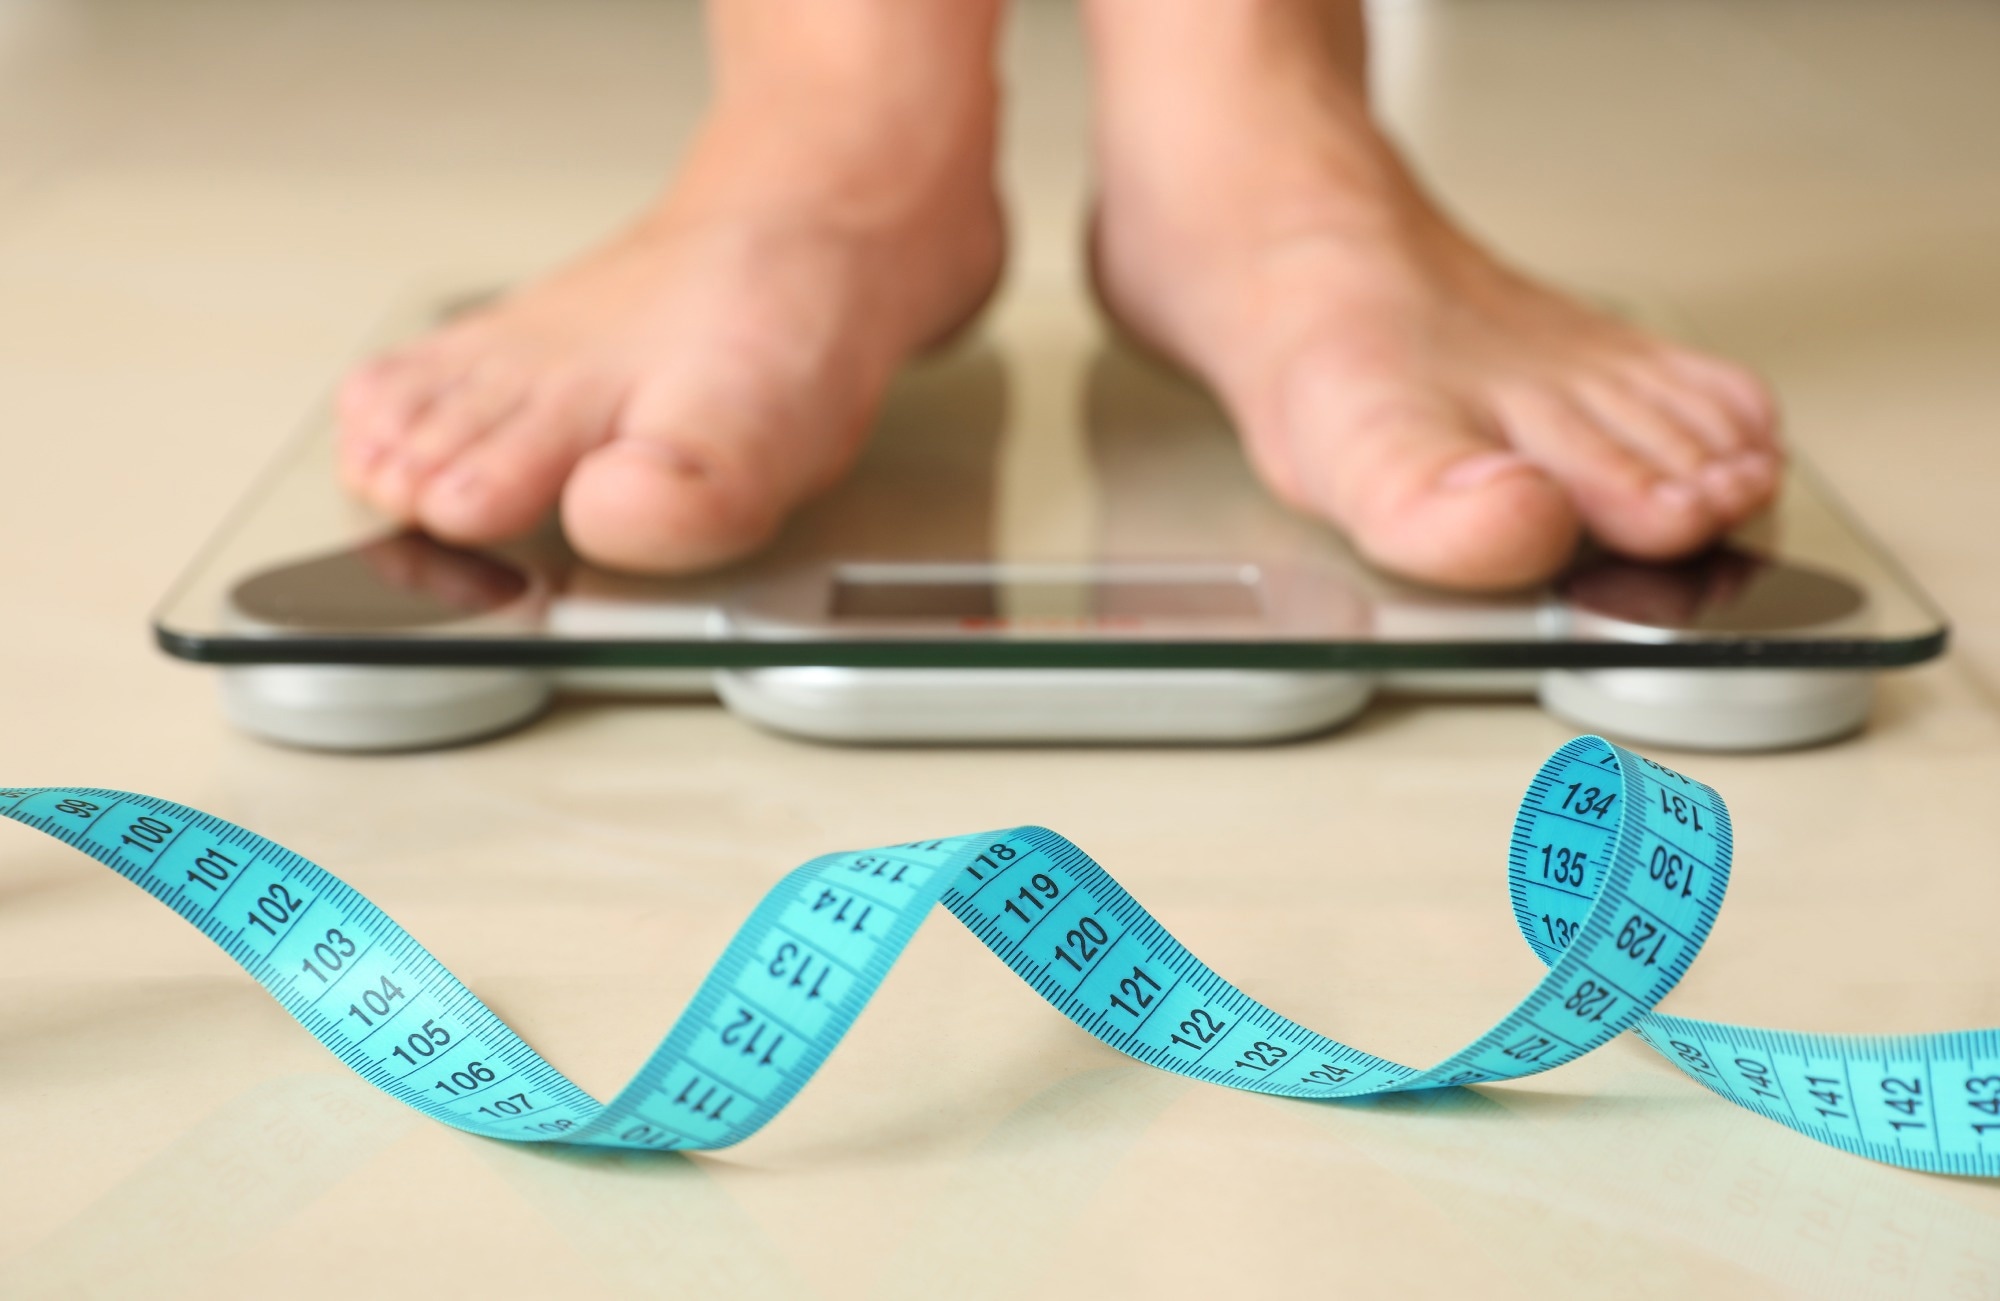 Brief Communication: Socio-economic differences in body mass index: the contribution of genetic factors. Image Credit: New Africa / Shutterstock